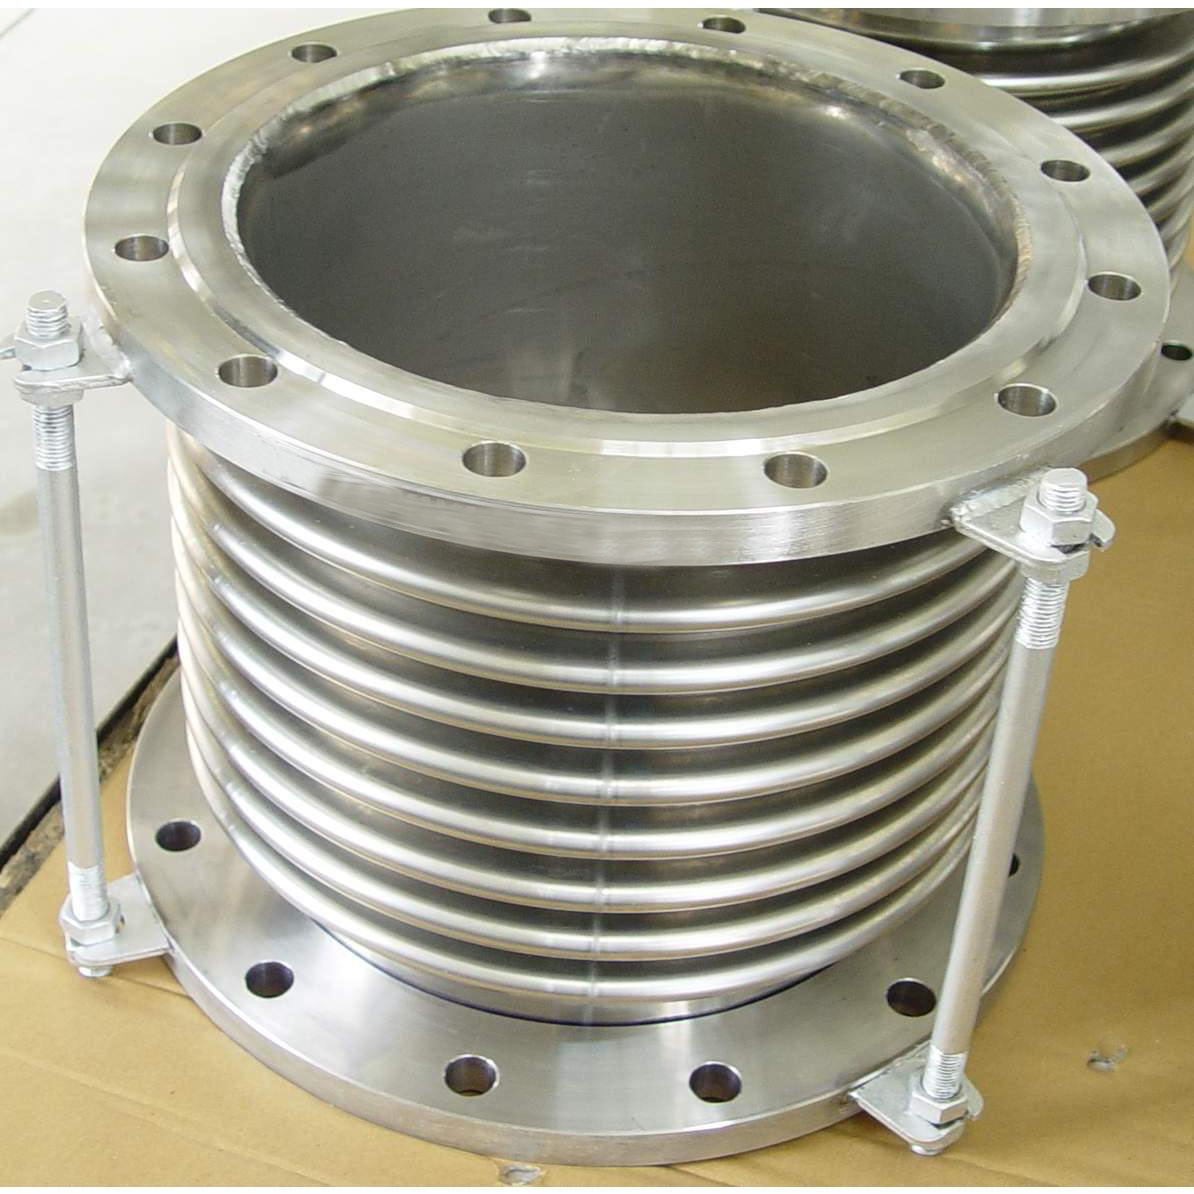 Metallic Expansion Joint Products Maxflex Industrial Colimited